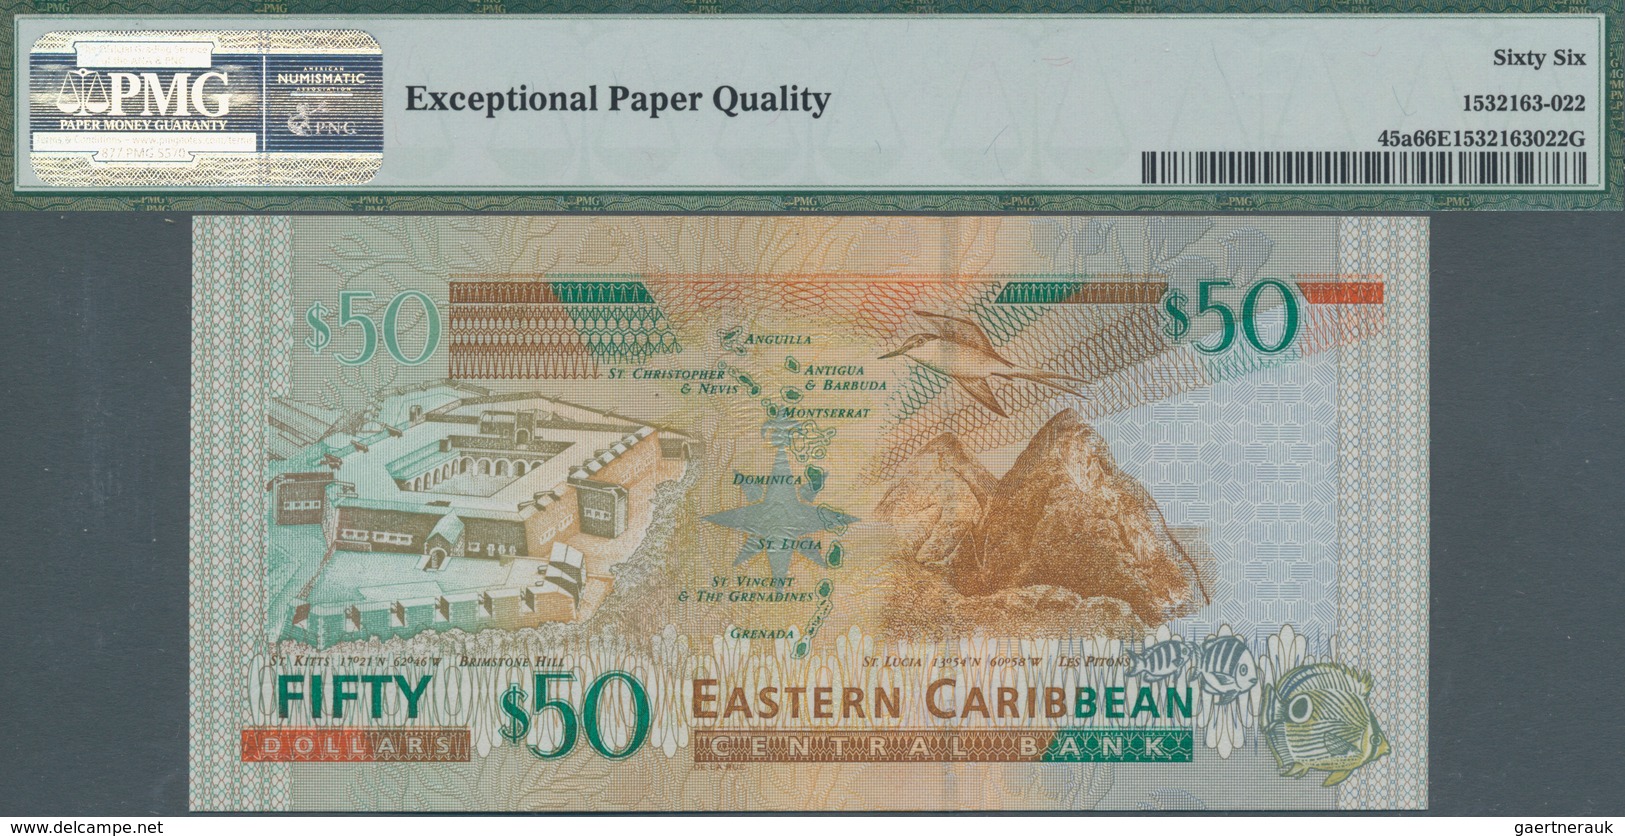 Antigua: Nice set with 4 banknotes 50 Dollars ND(2003), P.45a, all in UNC and three of them consecut